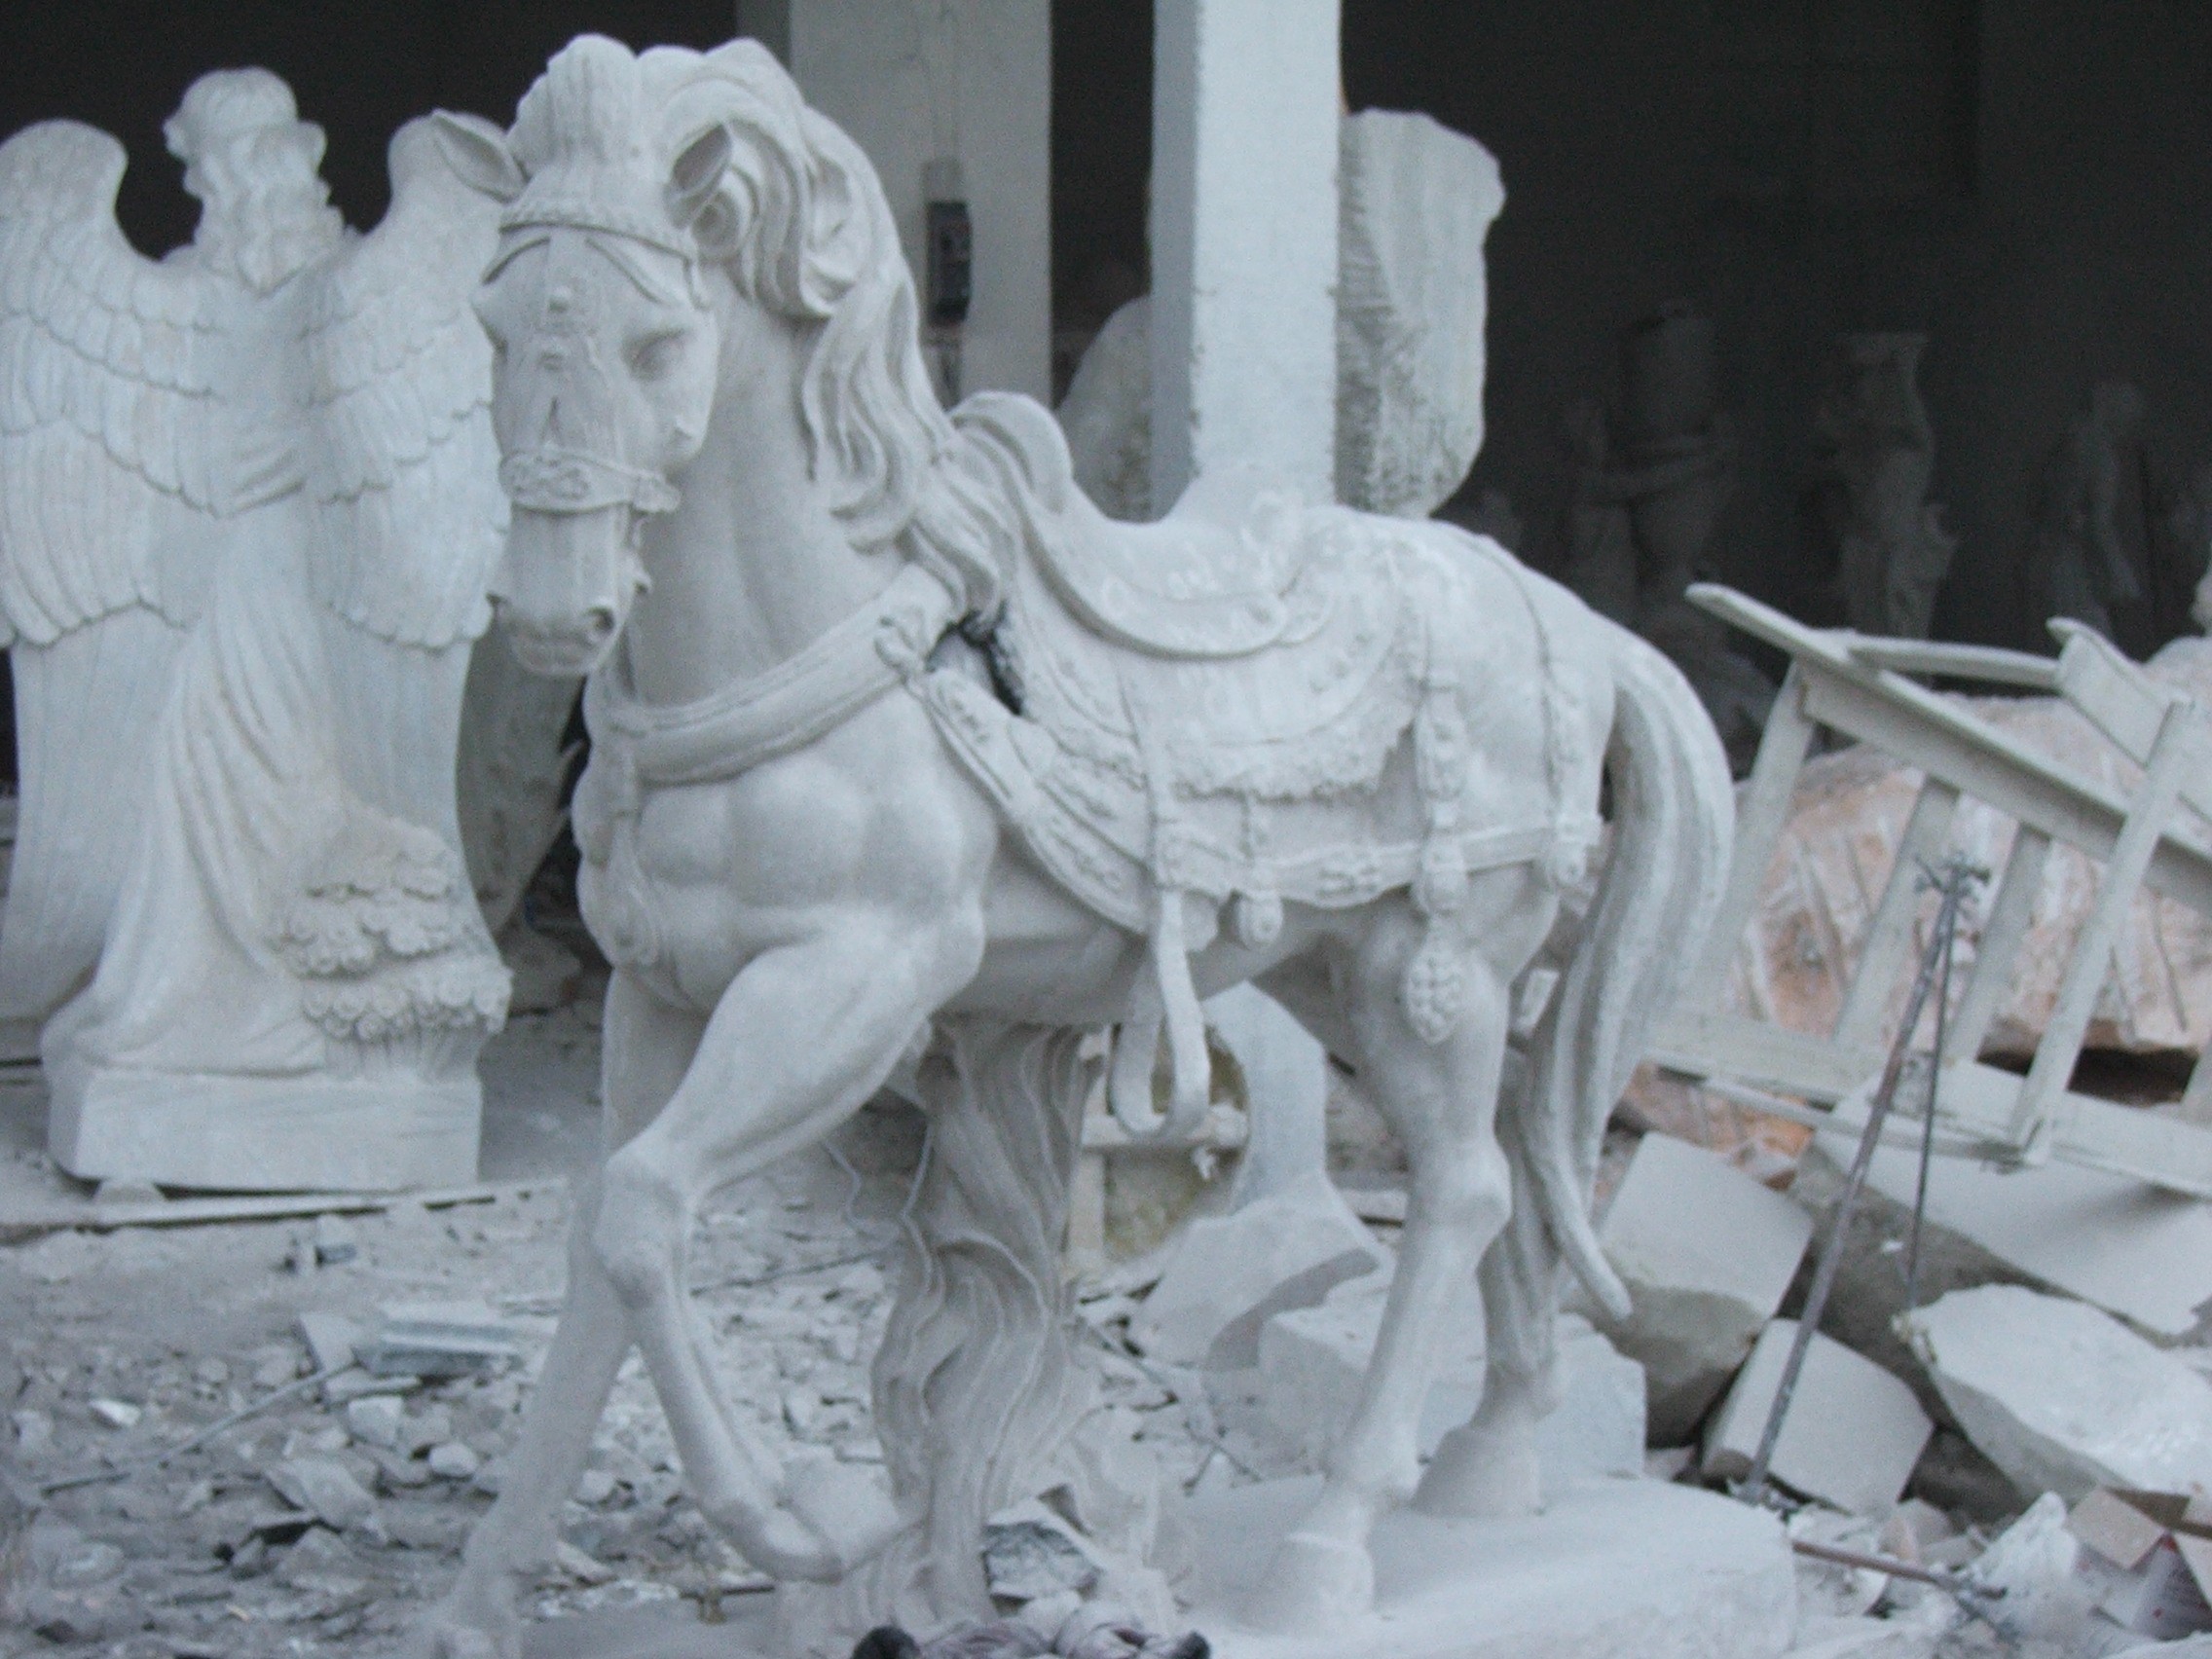 marble horse